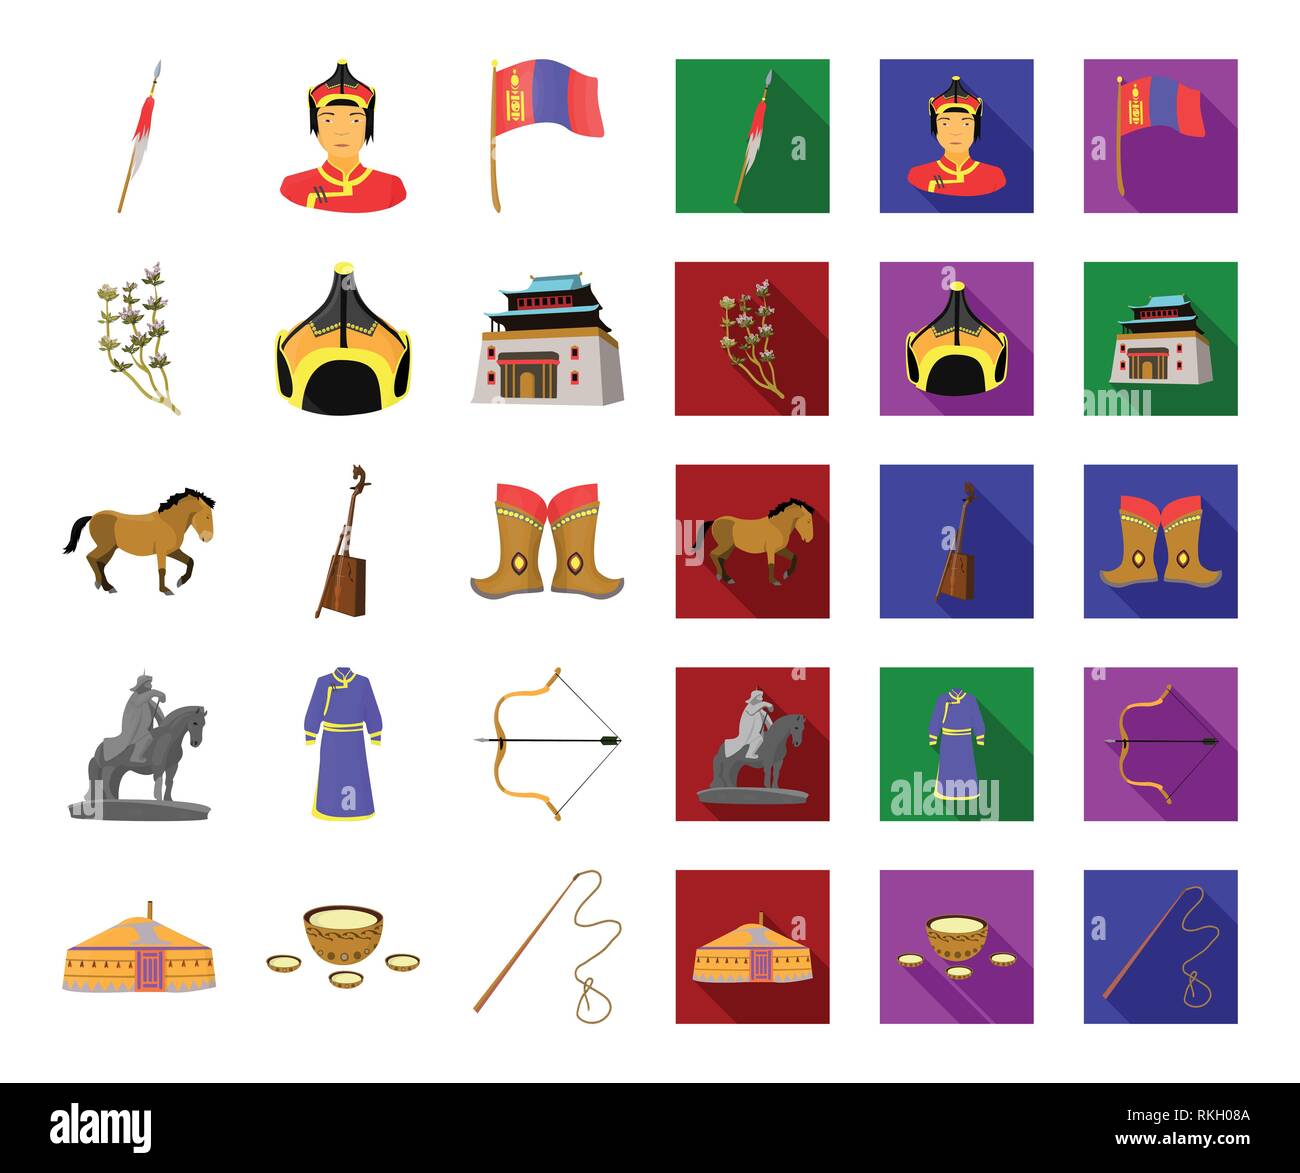 arms,arrow,belt,bow,buddhism,building,cartoon,flat,cashmere,coat,collection,country,culture,flag,flower,fur,genghis,gutuly,headdress,horse,hudak,icon,illustration,instrument,khan,kialis,kumis,landmark,leather,map,monastery,mongol,mongolia,monument,musical,nature,religion,robe,set,shoes,sign,spear,temple,territory,tradition,travel,vector,whip,wool,yurt Vector Vectors , Stock Vector